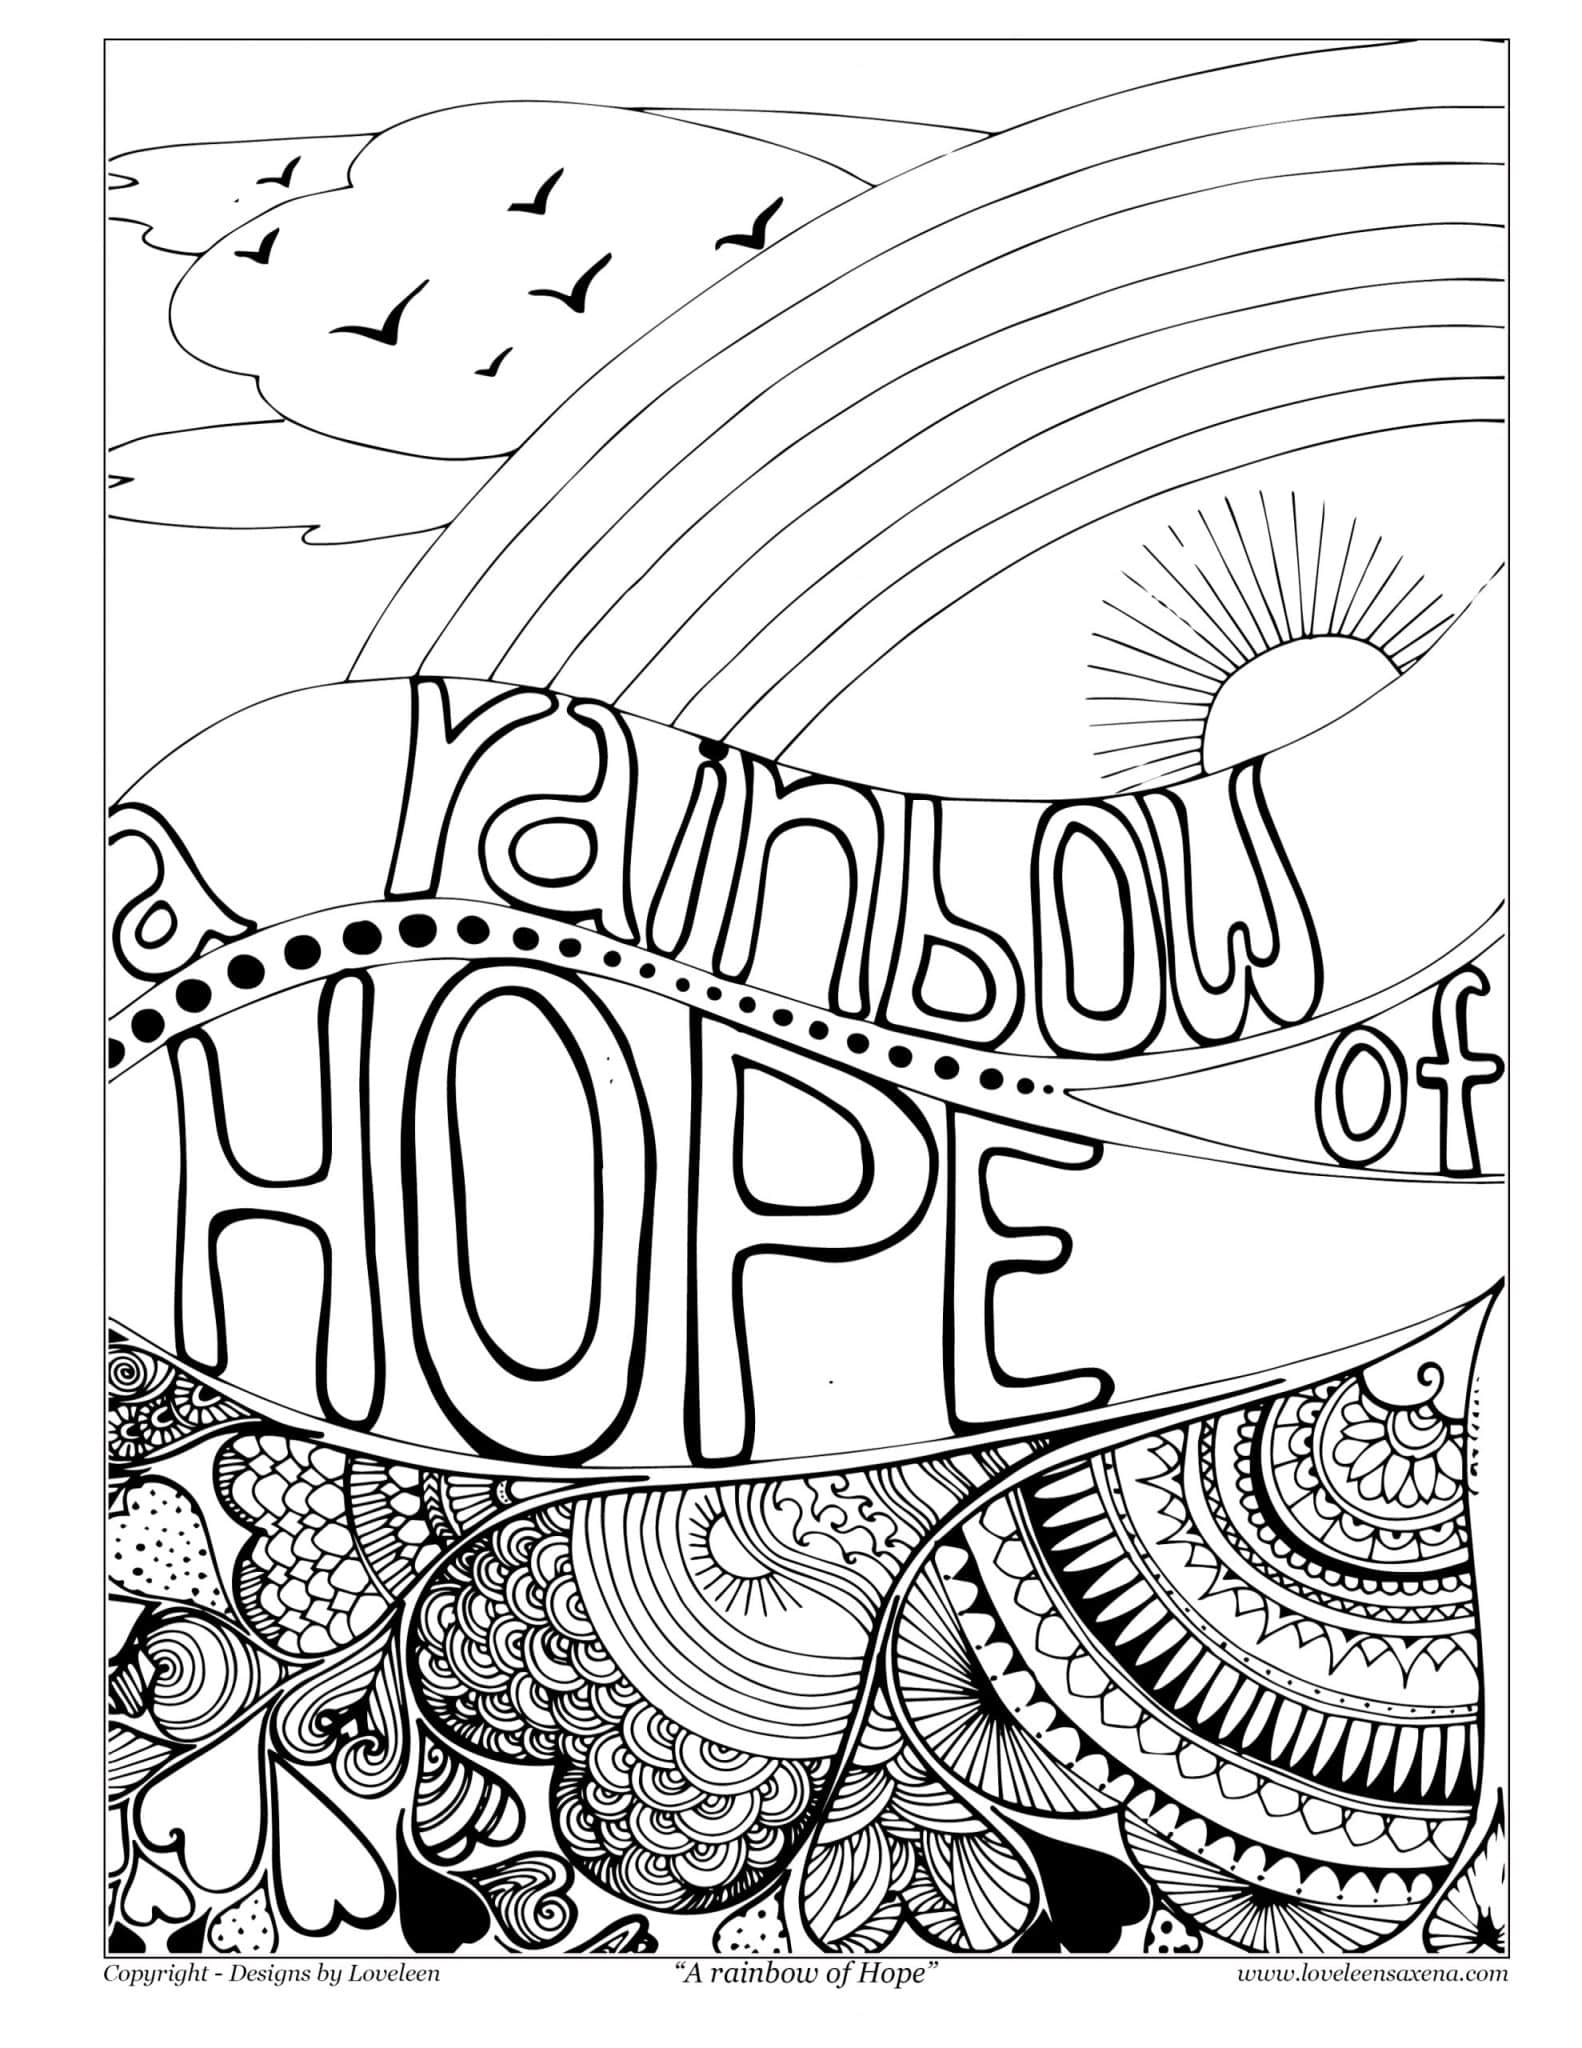 Rainbow of Hope - Racial Justice